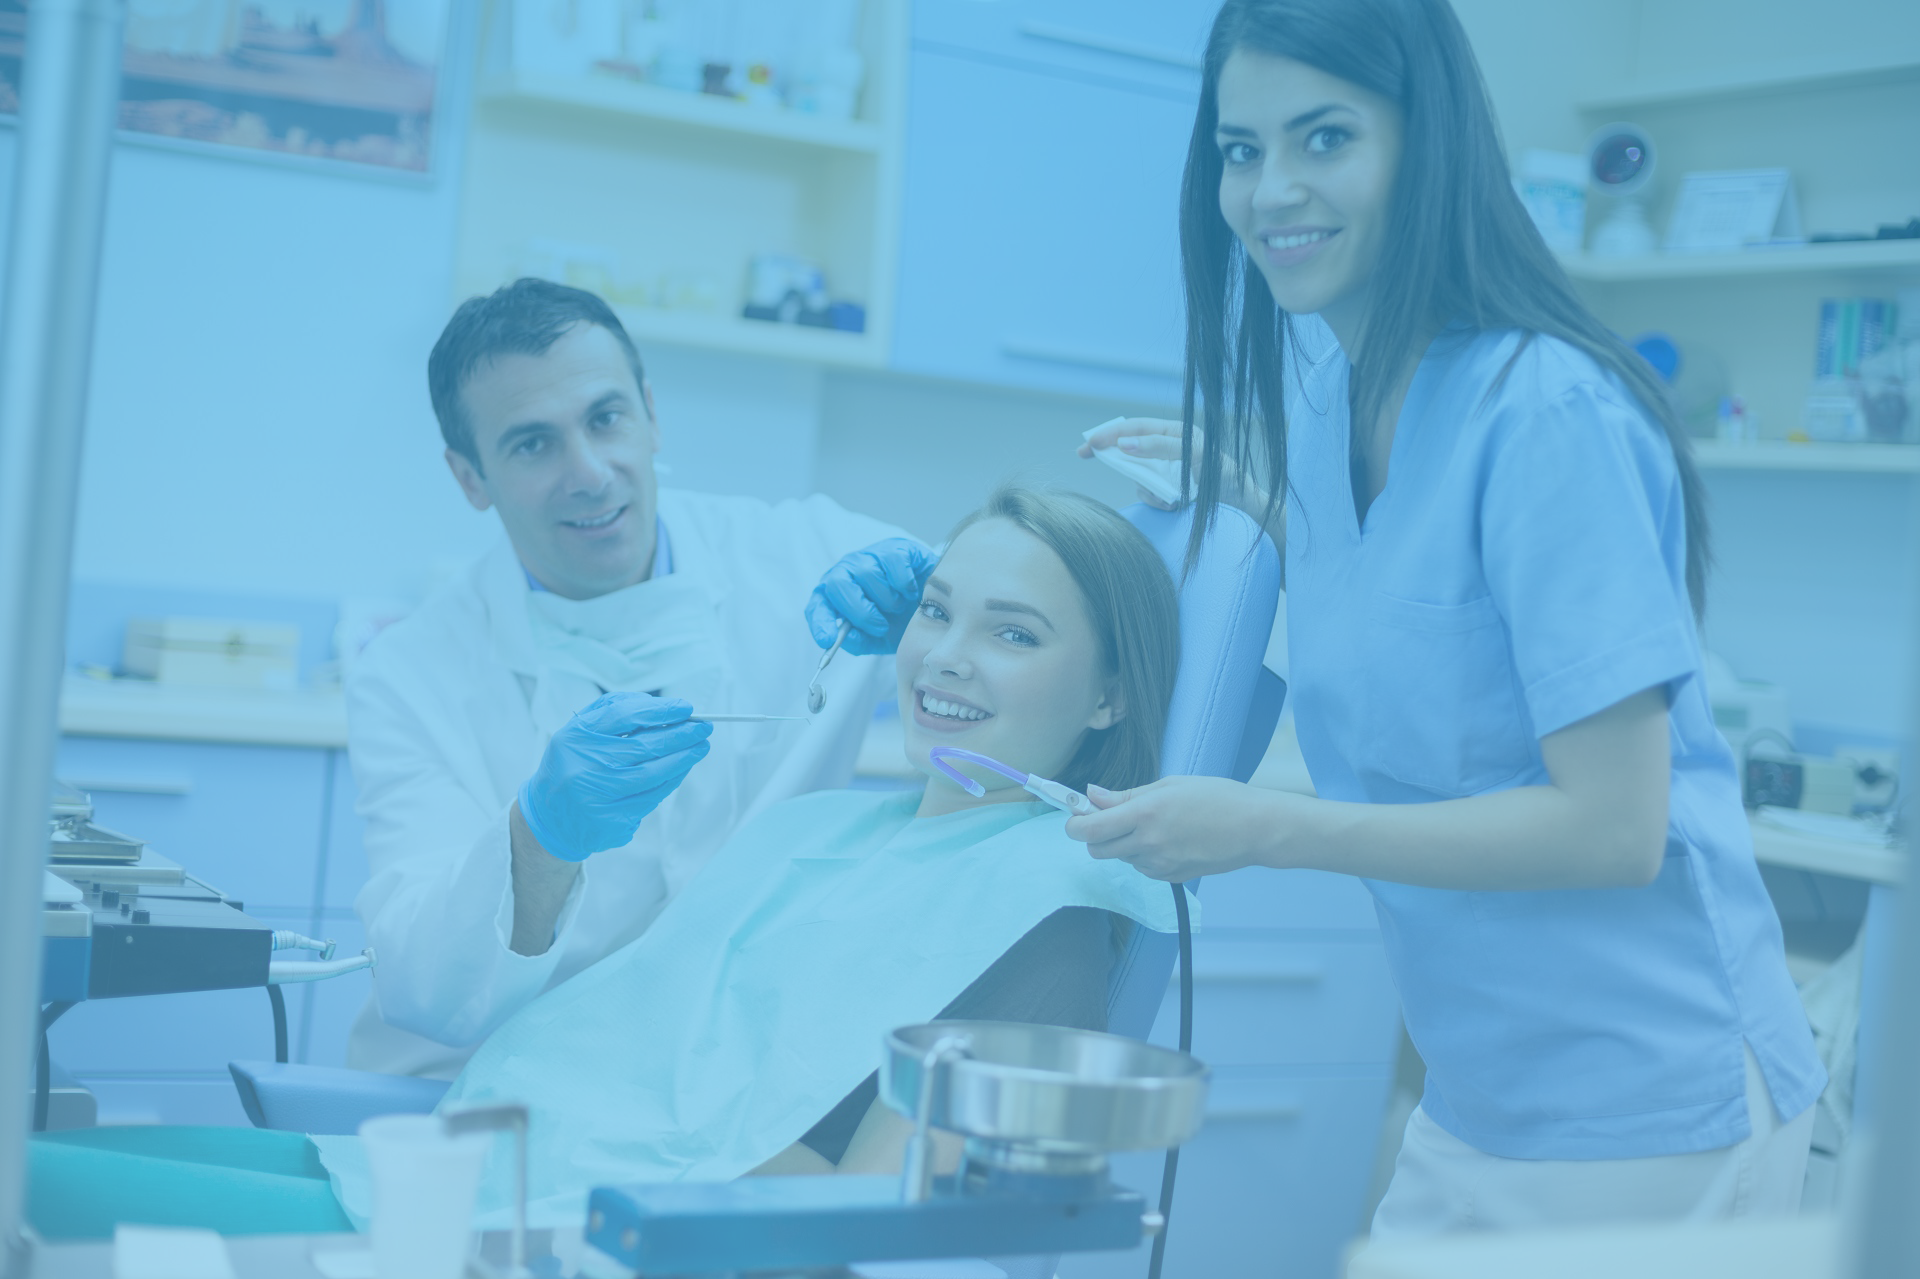 Dental Assistant and Orthodontic Assistant School